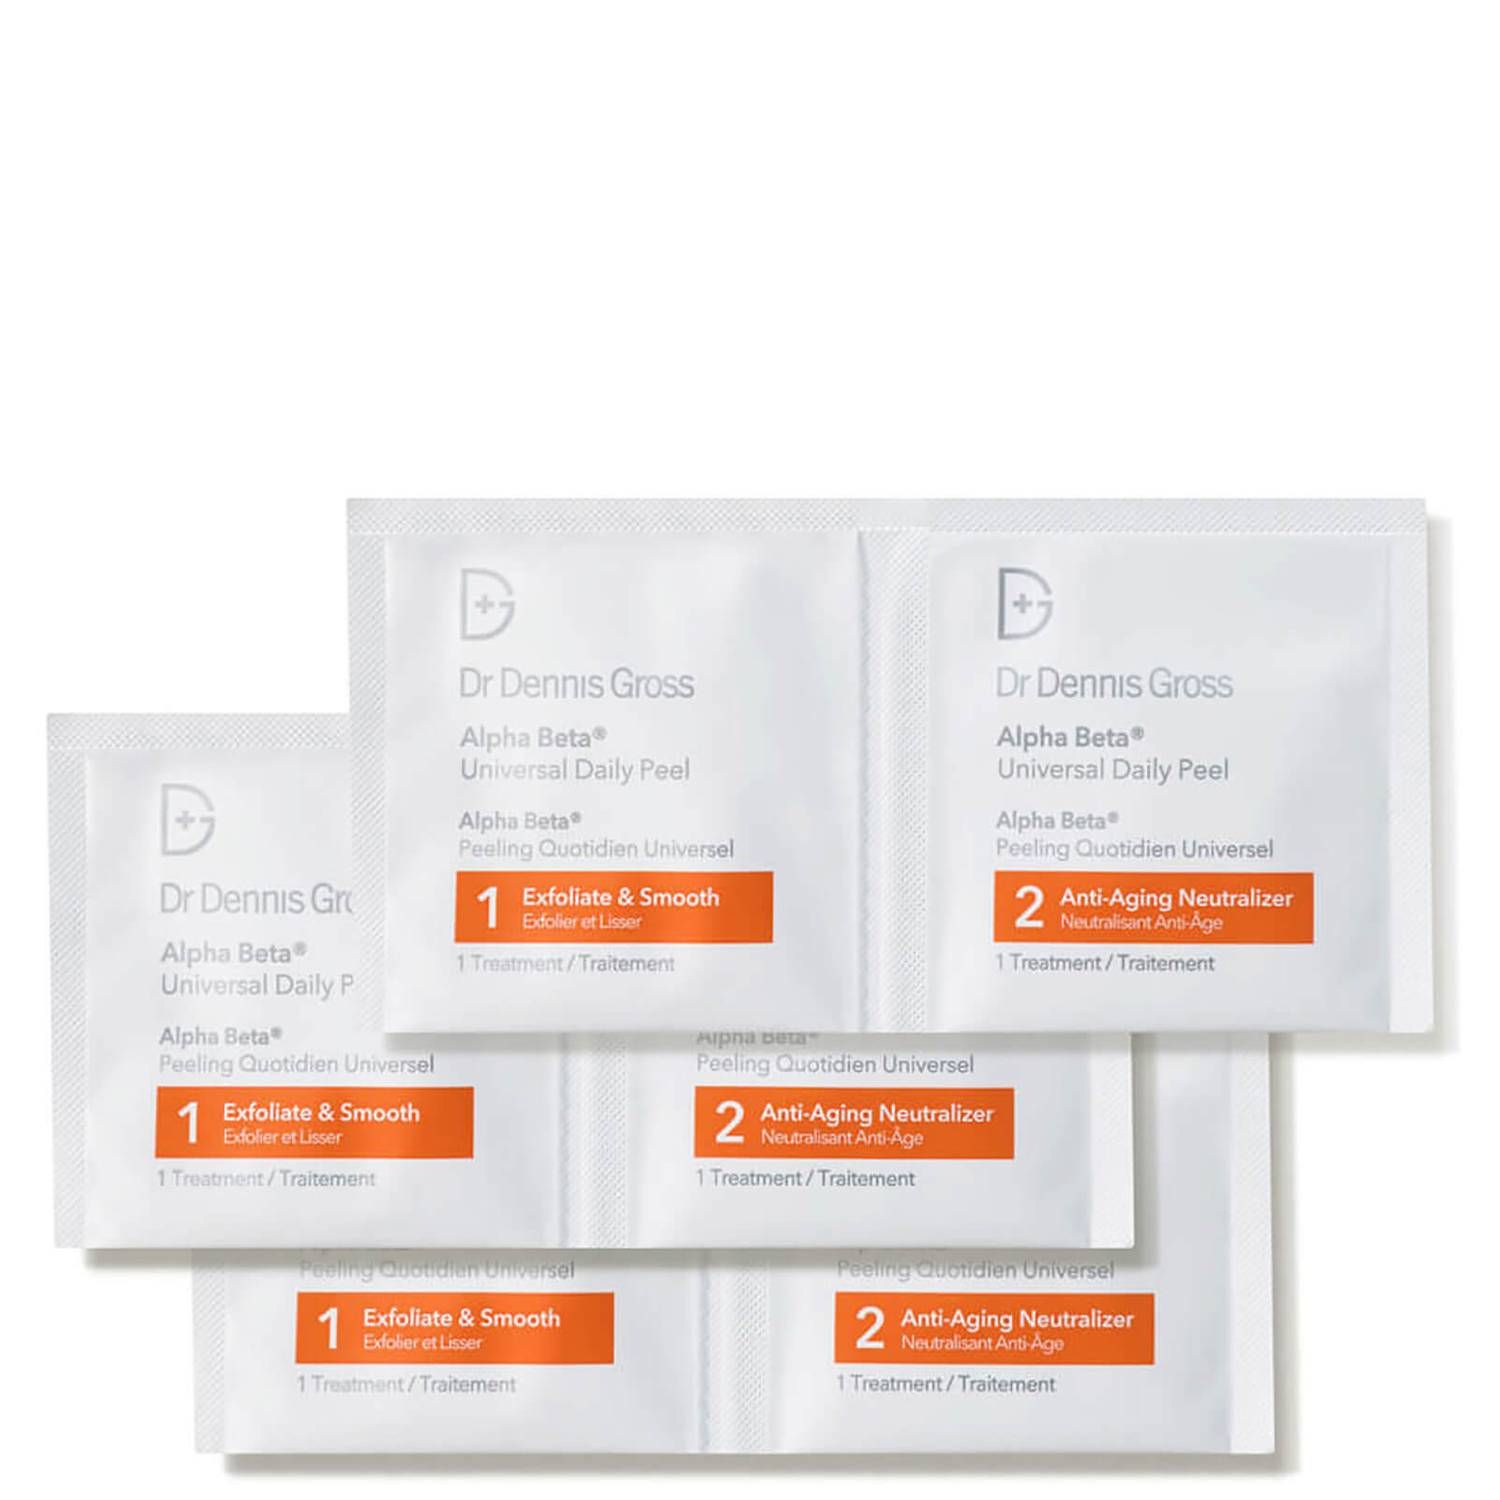 Dr Dennis Gross Alpha Beta Universal Daily Peel - Packettes (30 count)